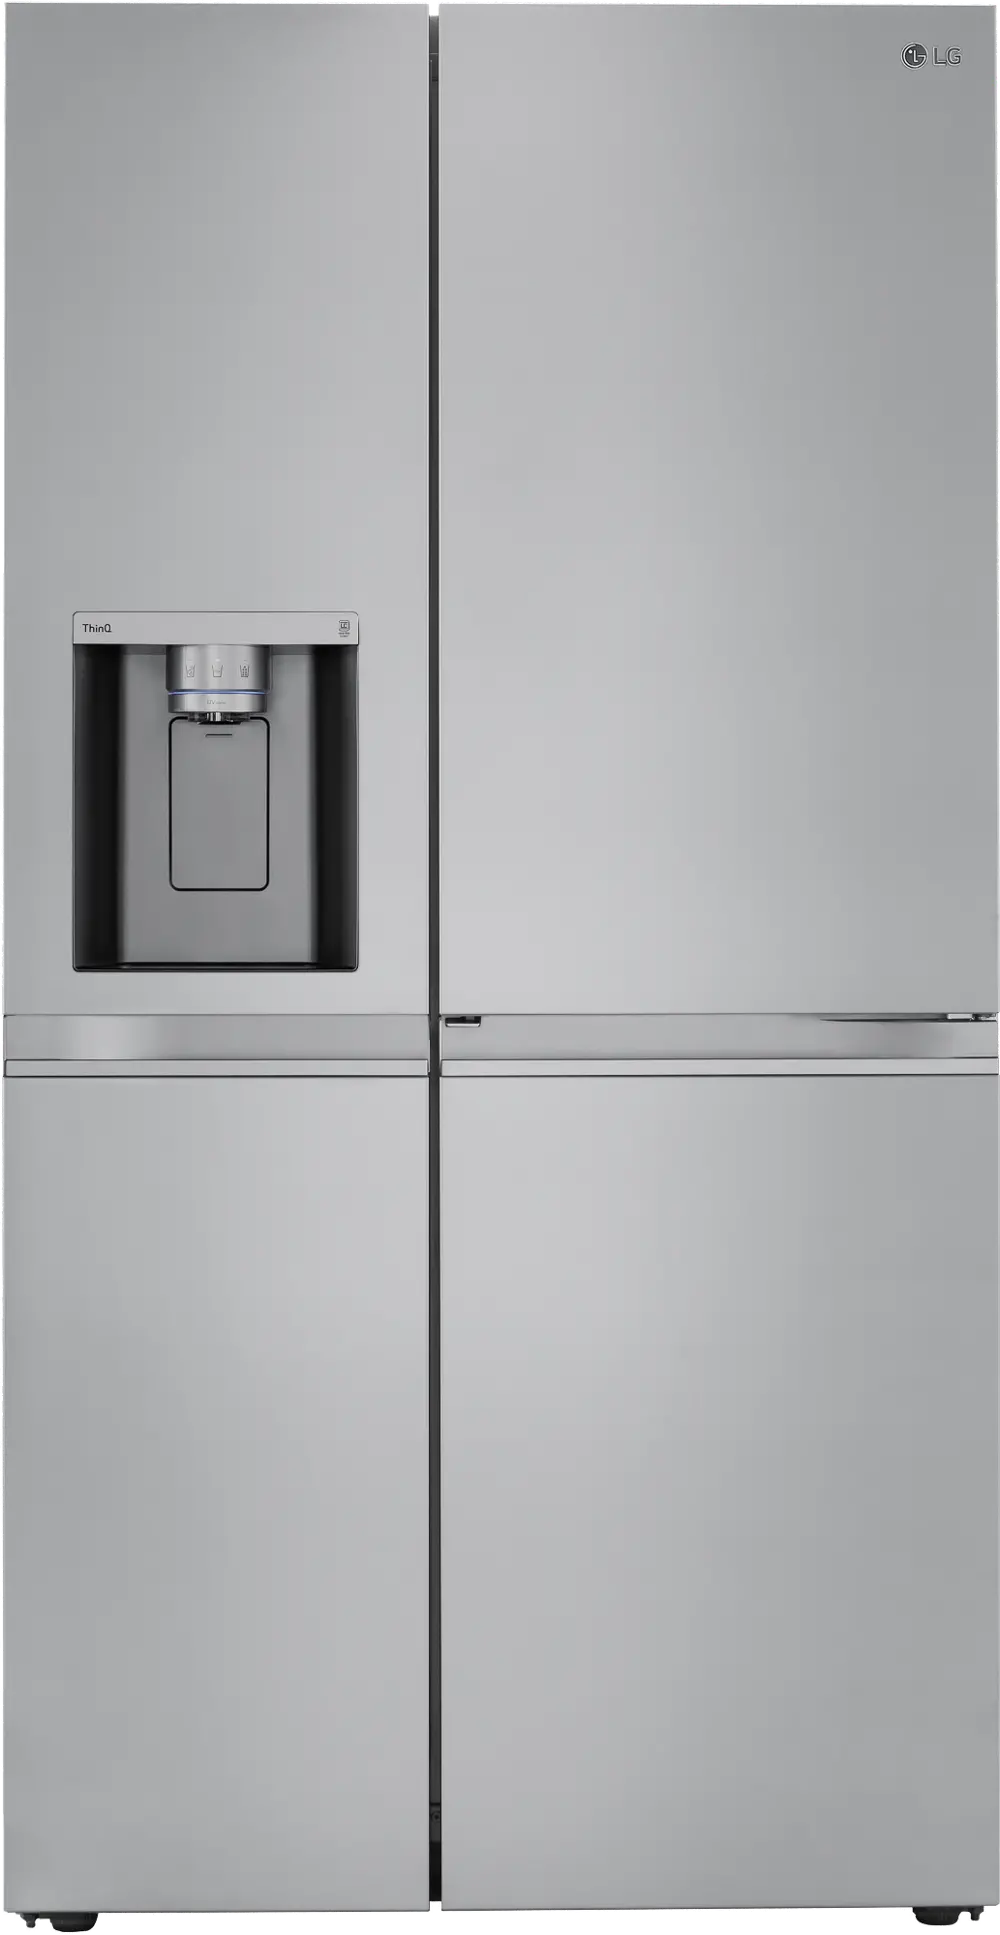 LRSDS2706S LG 26.8 cu ft Side by Side Refrigerator - Stainless Steel-1